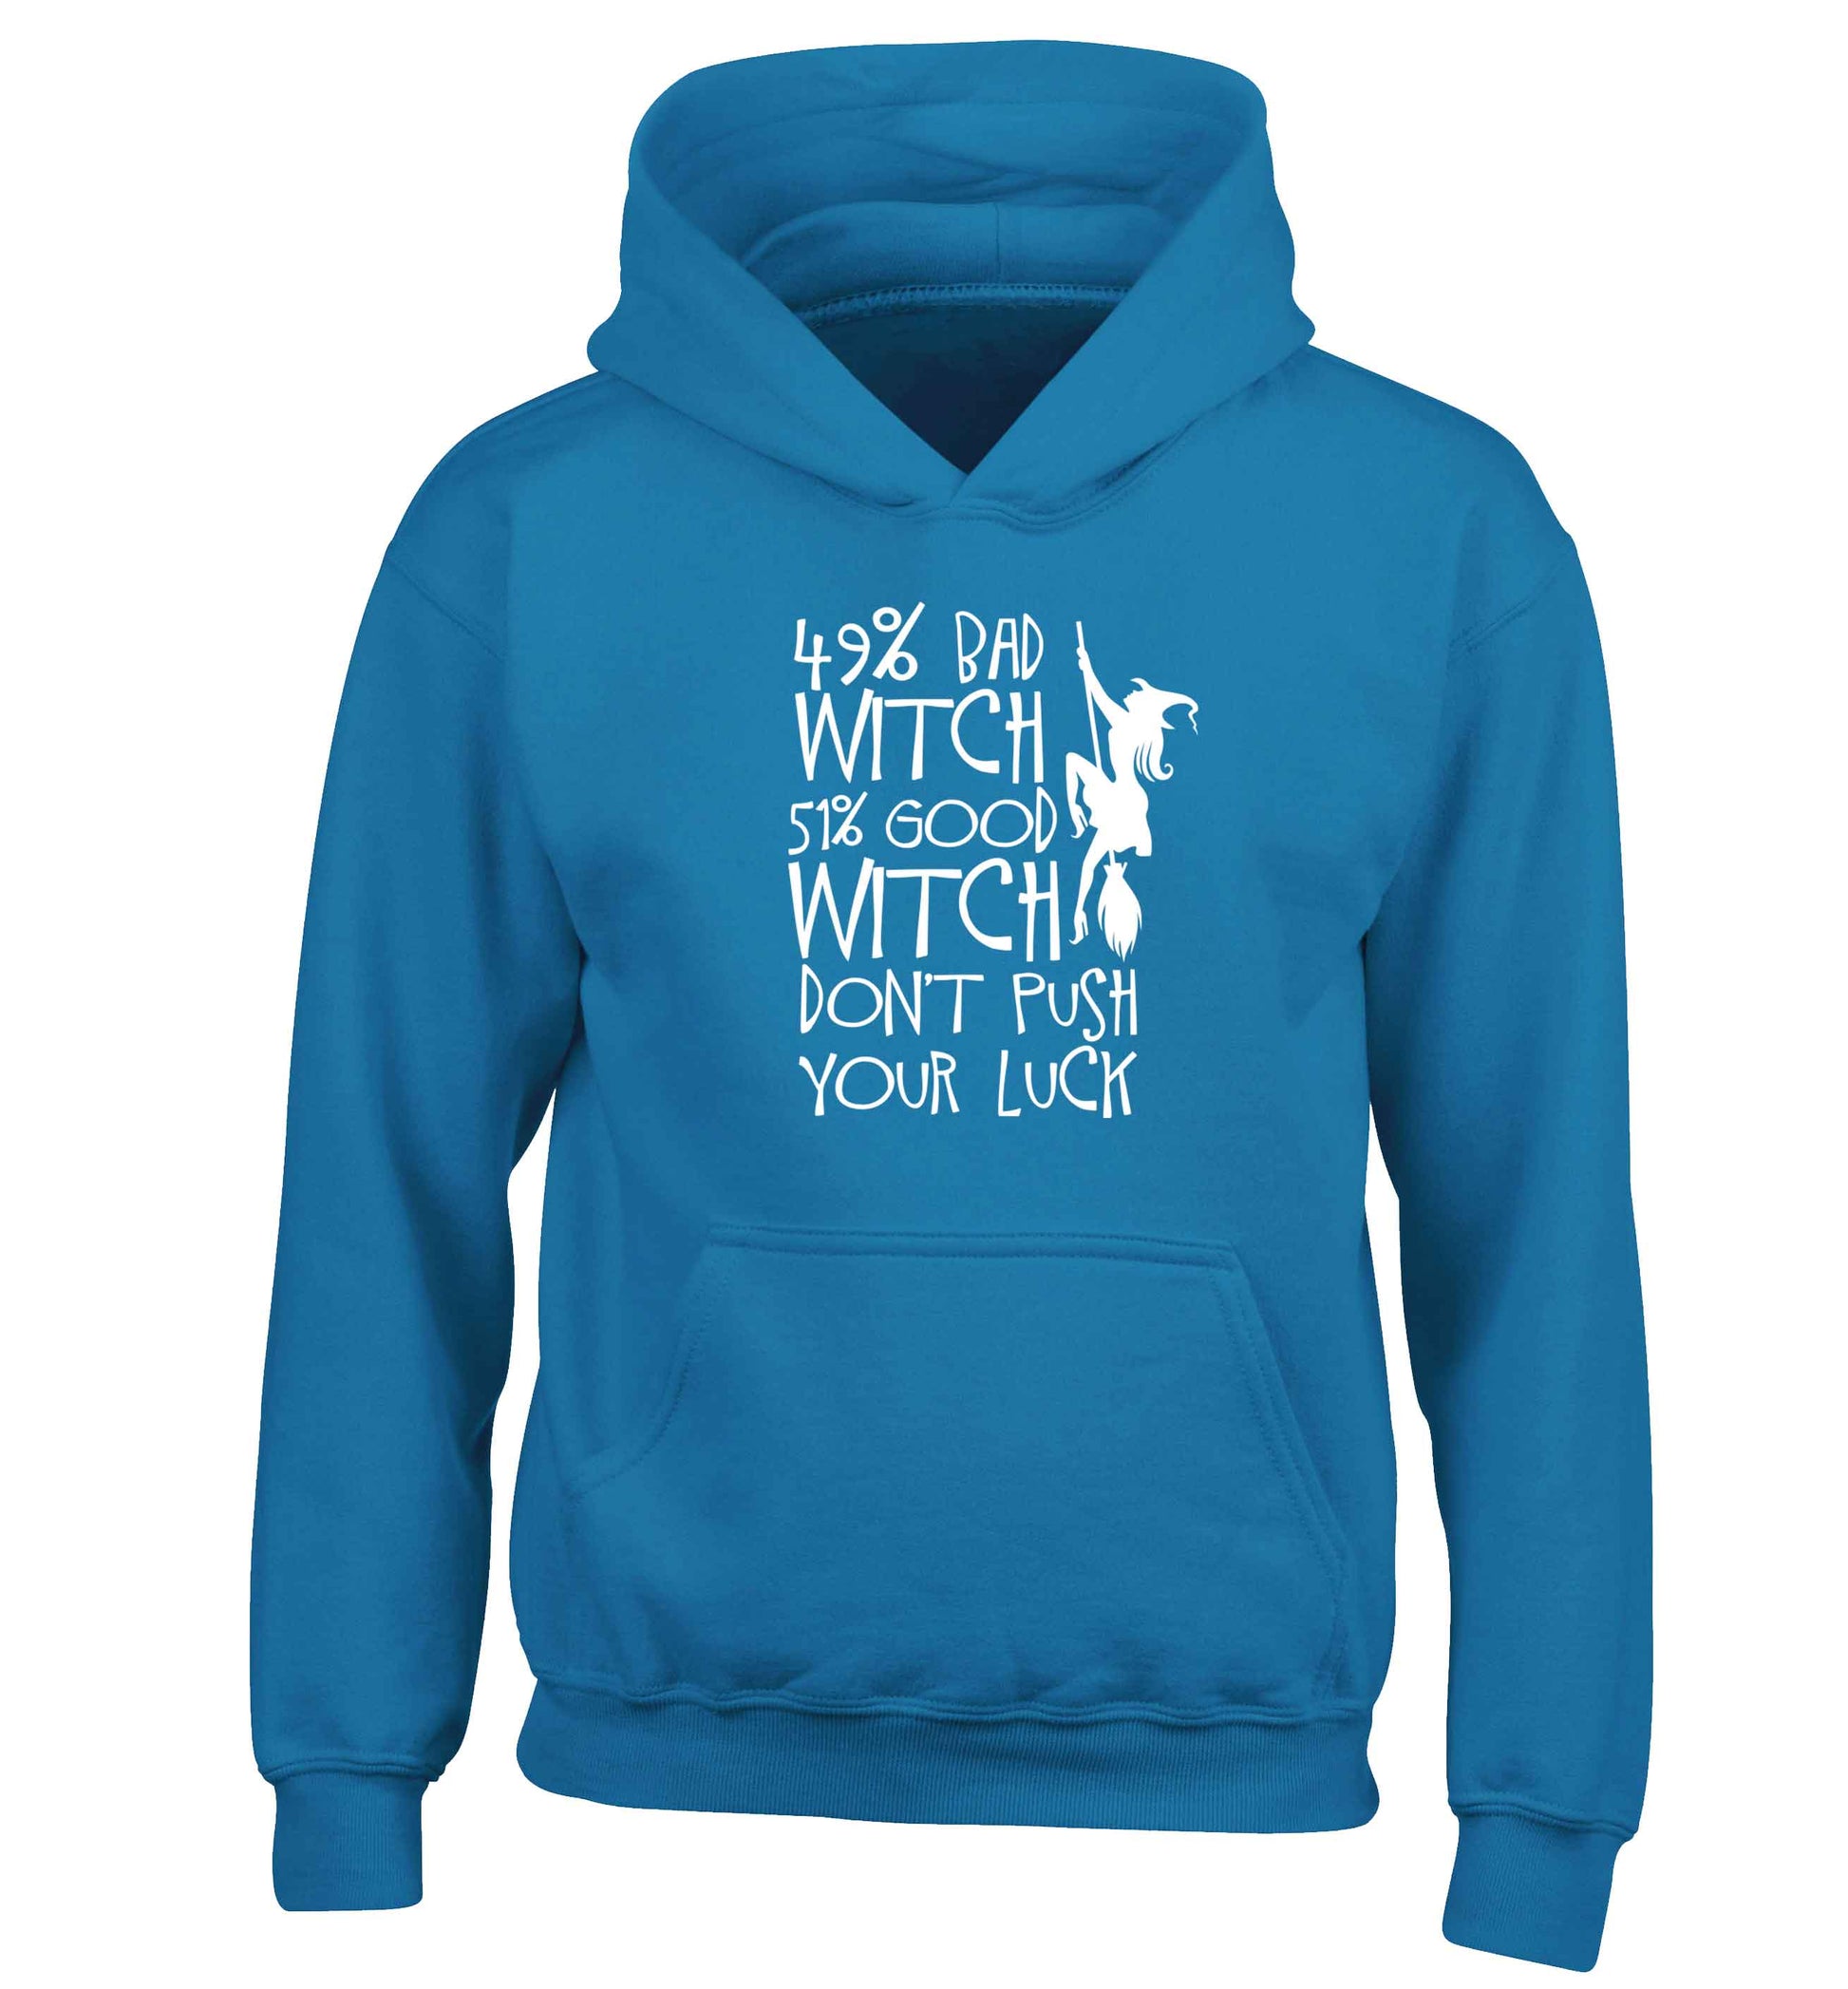 49% bad witch 51% good witch don't push your luck children's blue hoodie 12-13 Years